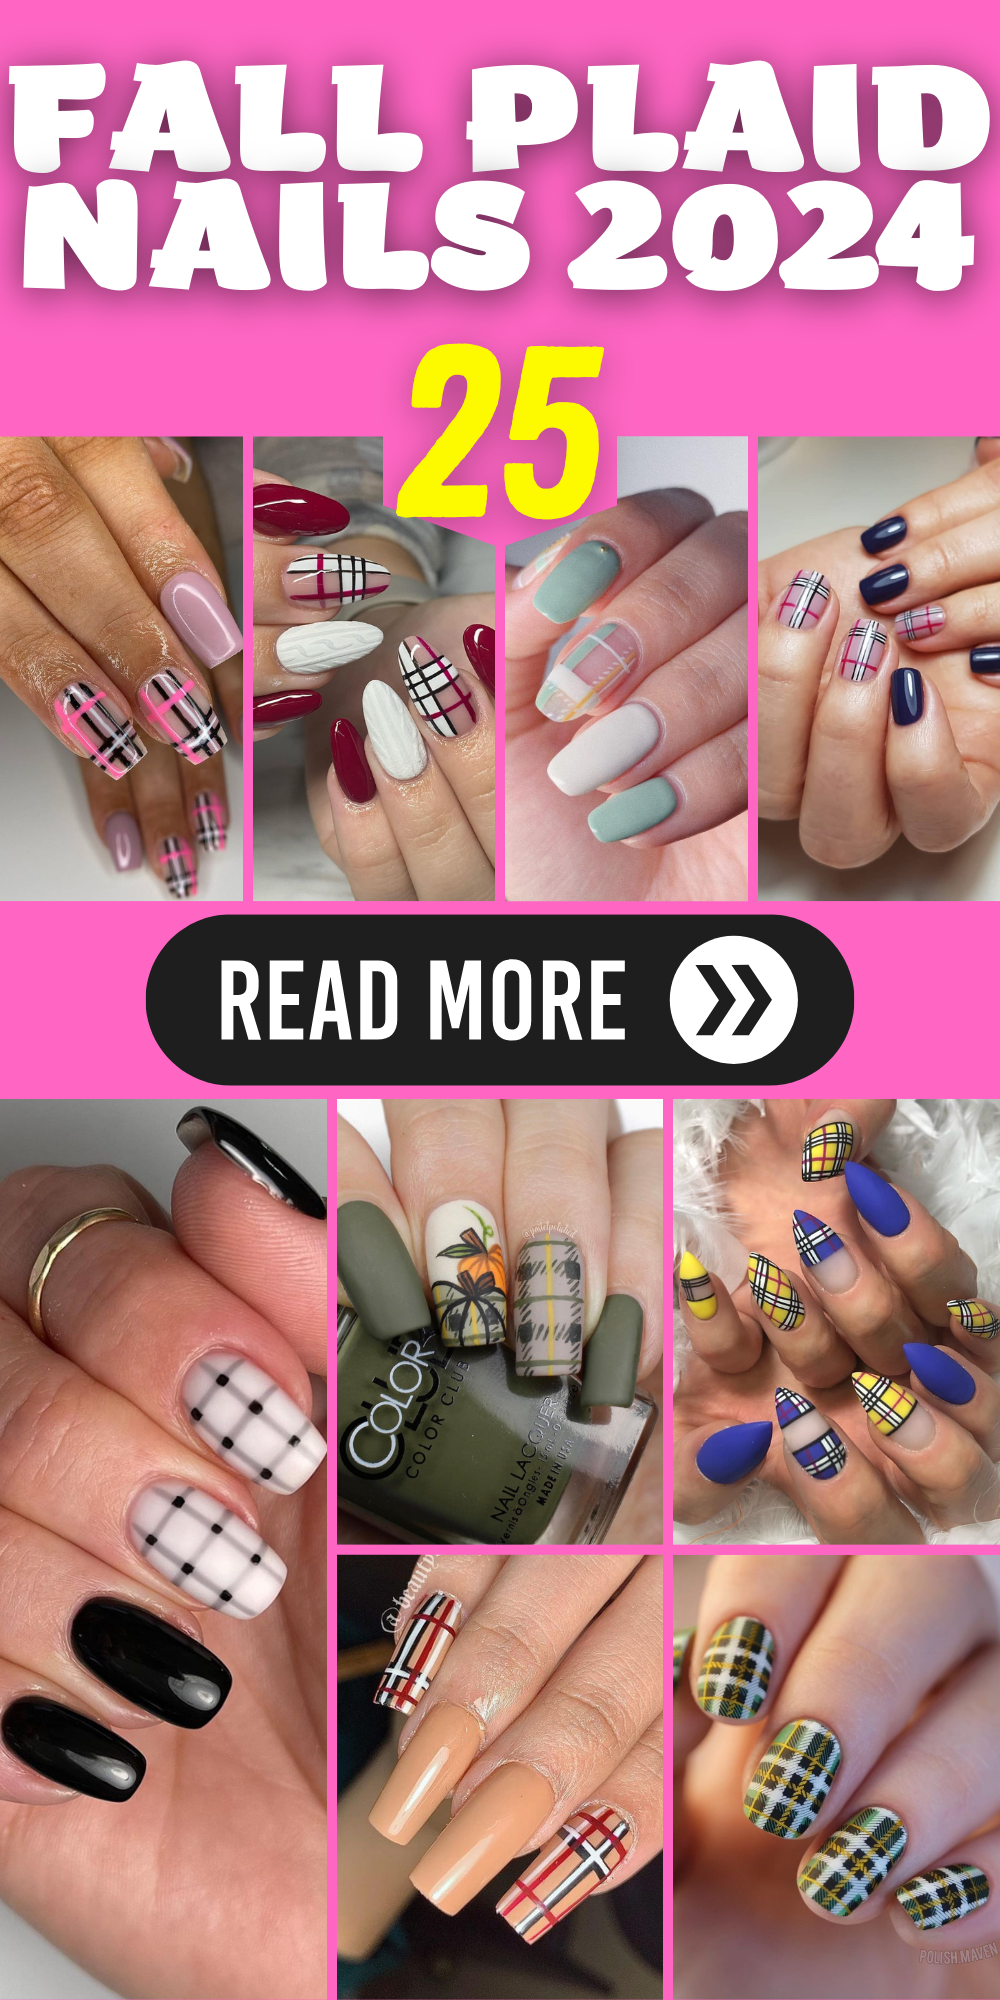 25 Trendy Ideas for Fall Plaid Nails 2024